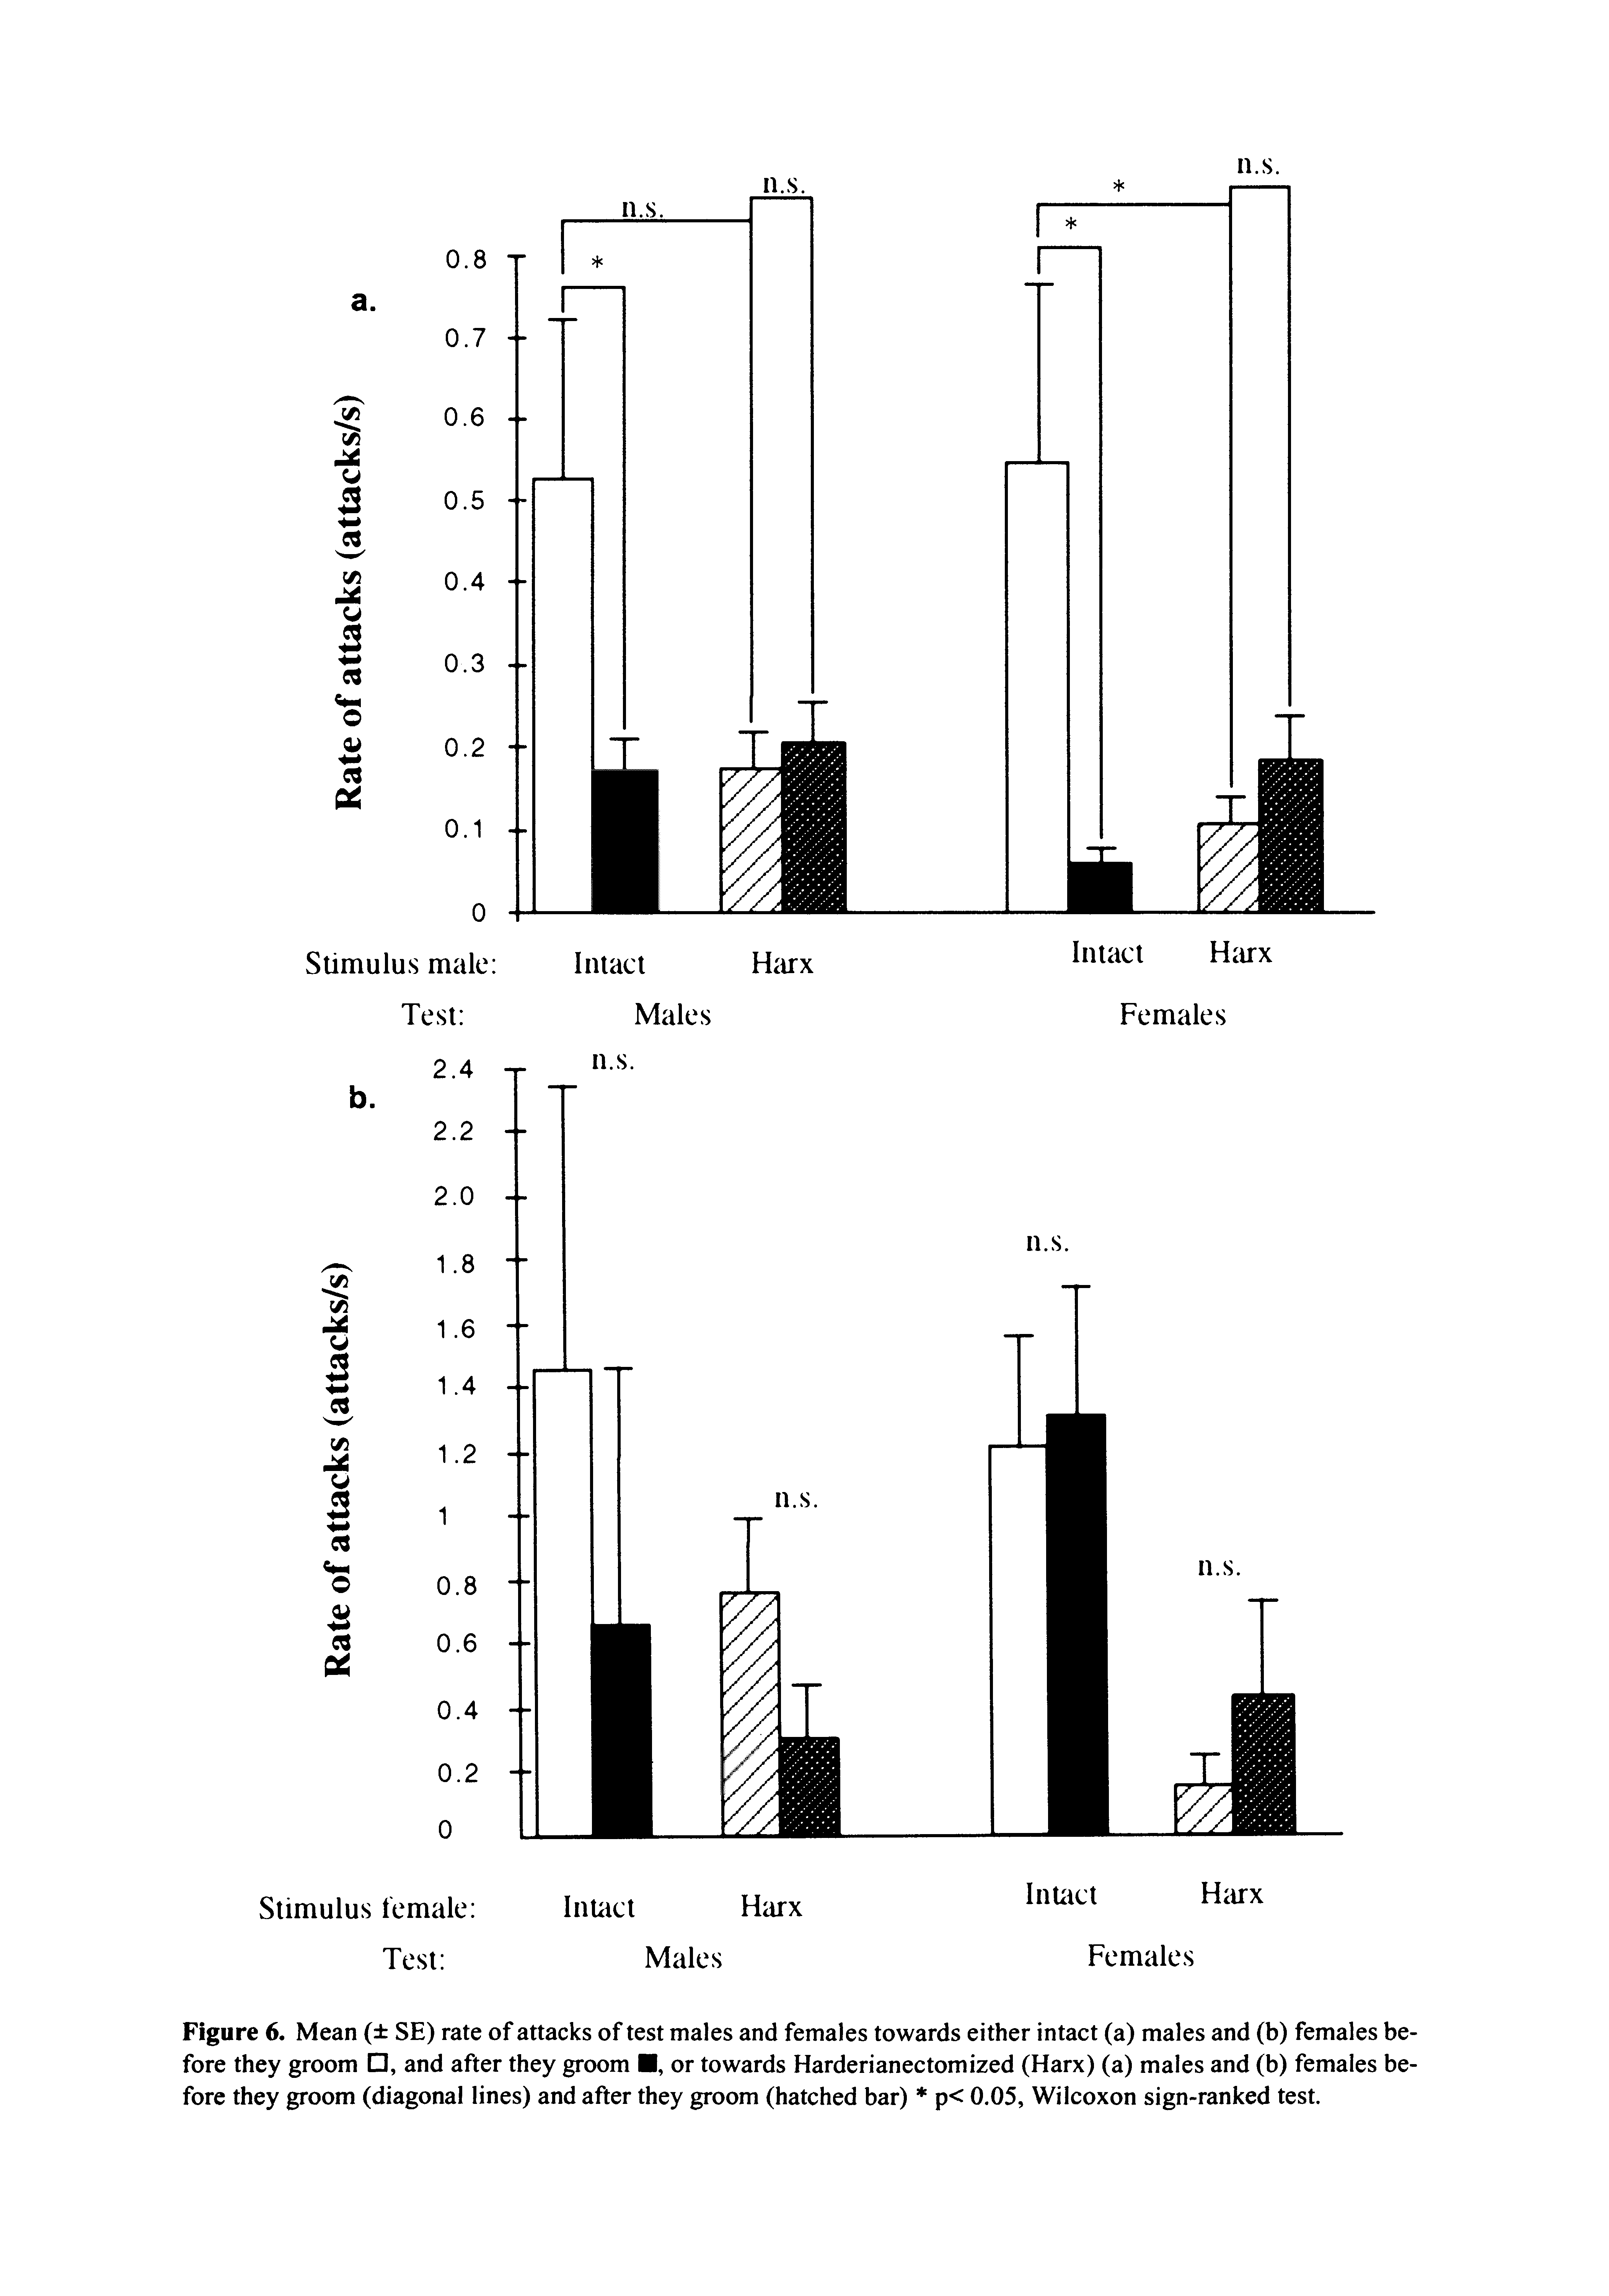 Figure 6. Mean ( SE) rate of attacks of test males and females towards either intact (a) males and (b) females before they groom , and after they groom , or towards Harderianectomized (Harx) (a) males and (b) females before they groom (diagonal lines) and after they groom (hatched bar) p< 0.05, Wilcoxon sign-ranked test.